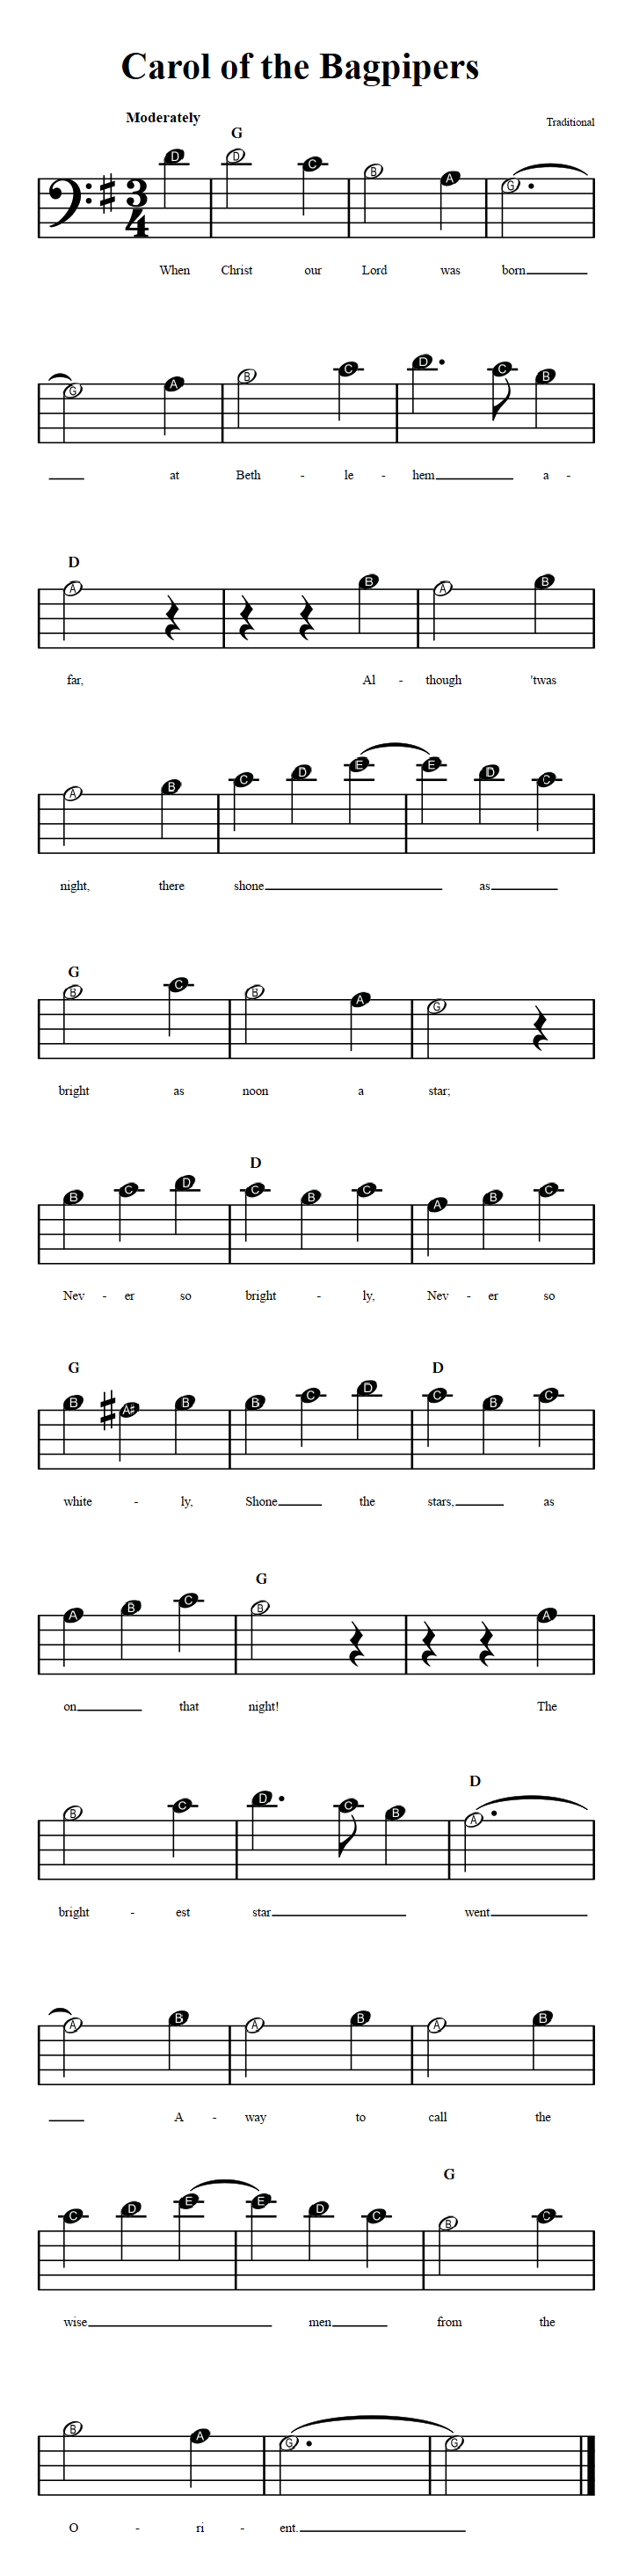 Carol of the Bagpipers: Beginner Bass Clef Sheet Music with Chords and ...